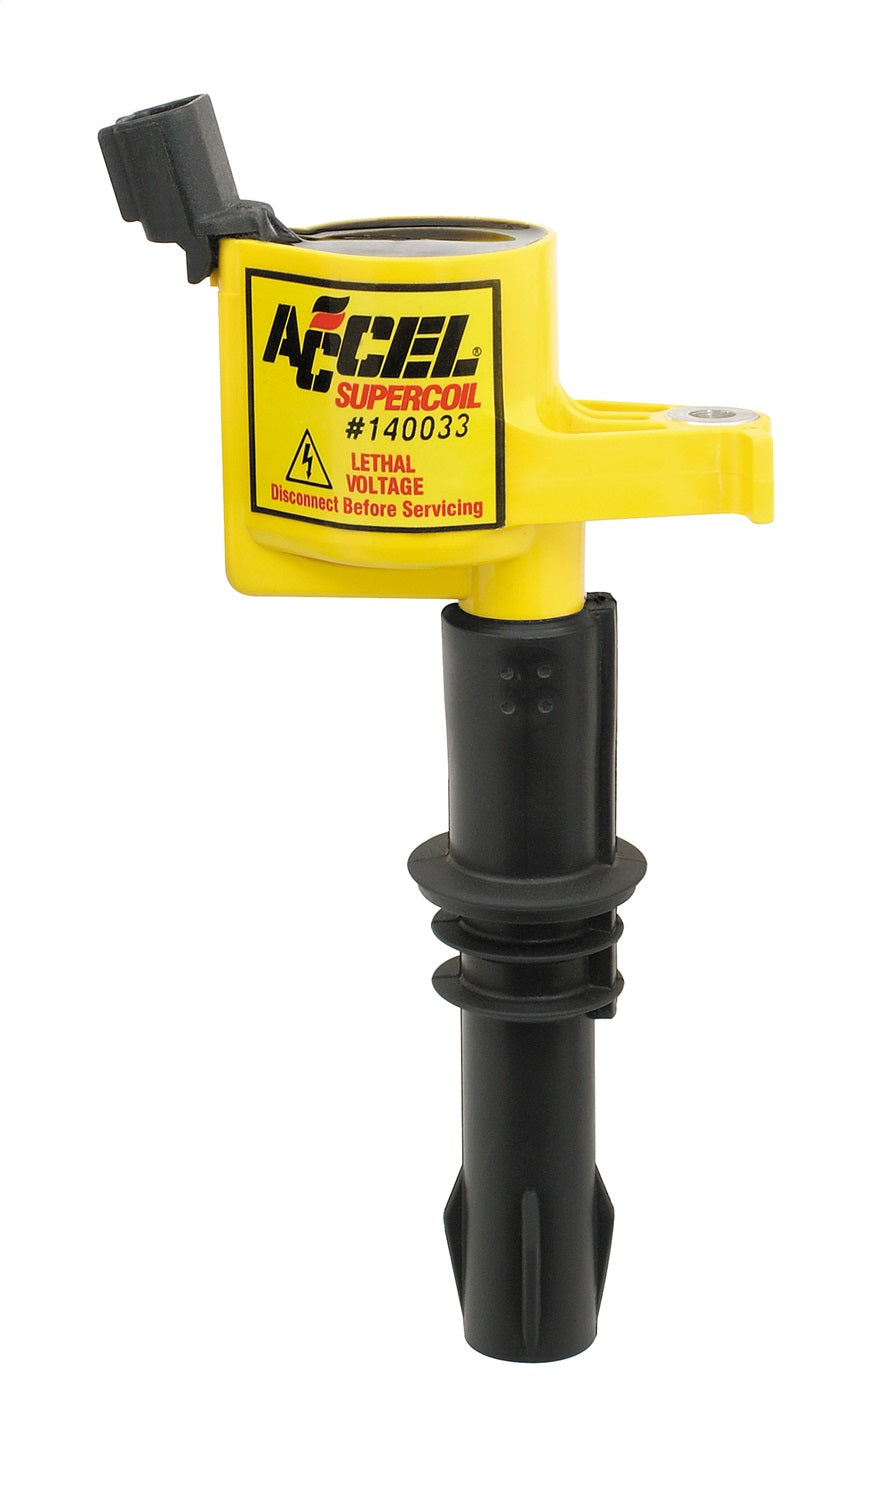 ACCEL 140033 SuperCoil Direct Ignition Coil